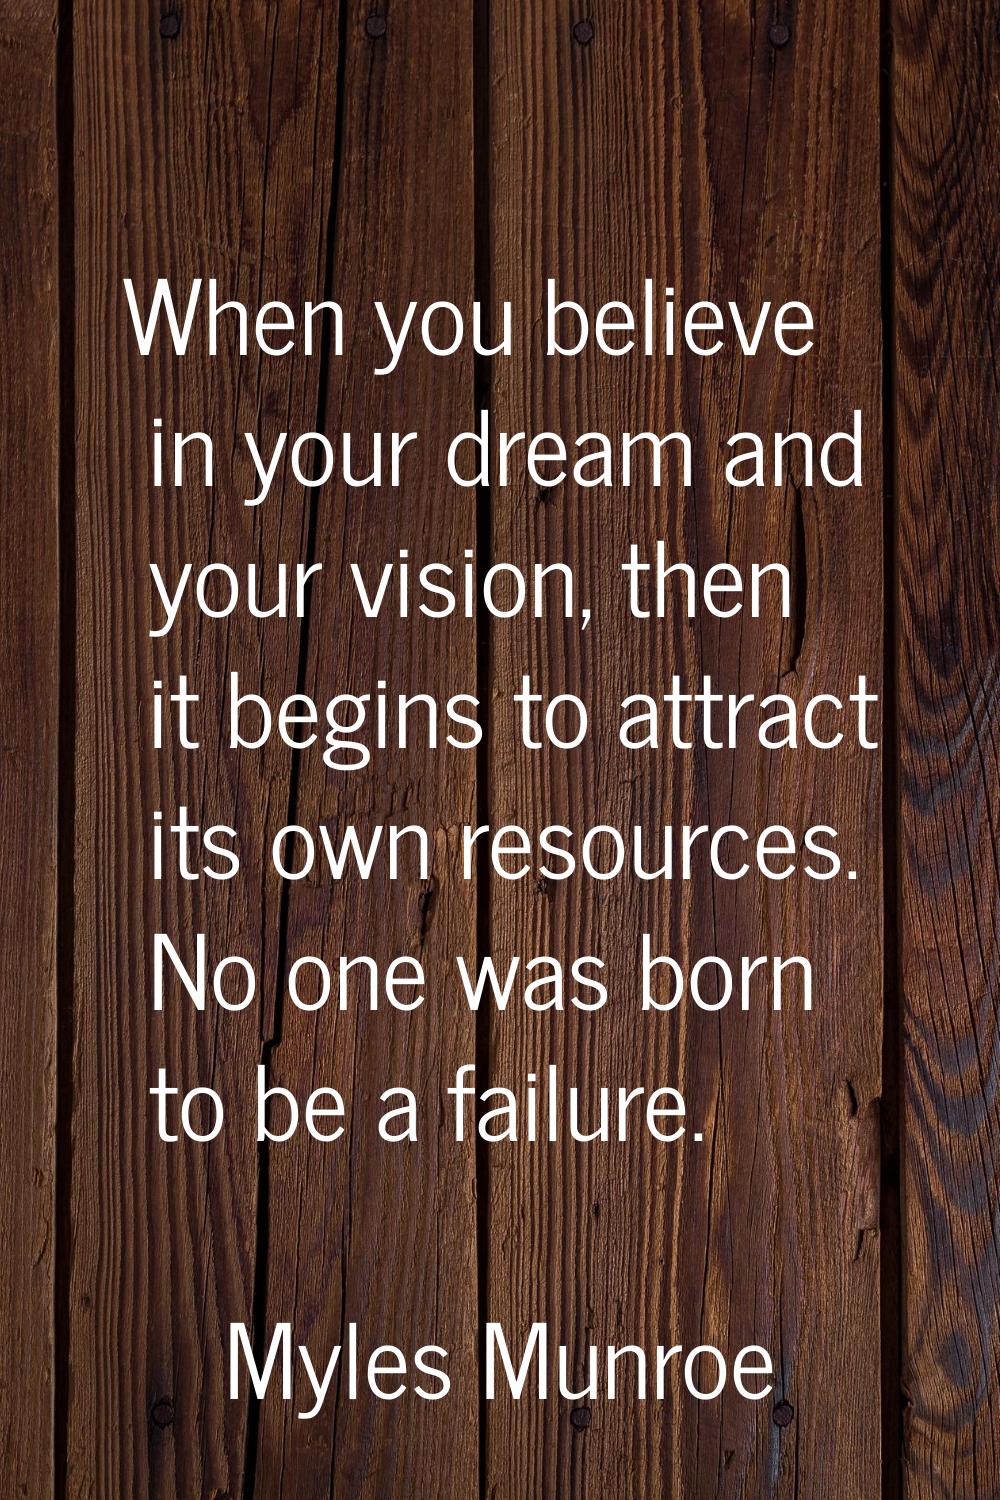 When you believe in your dream and your vision, then it begins to attract its own resources. No one